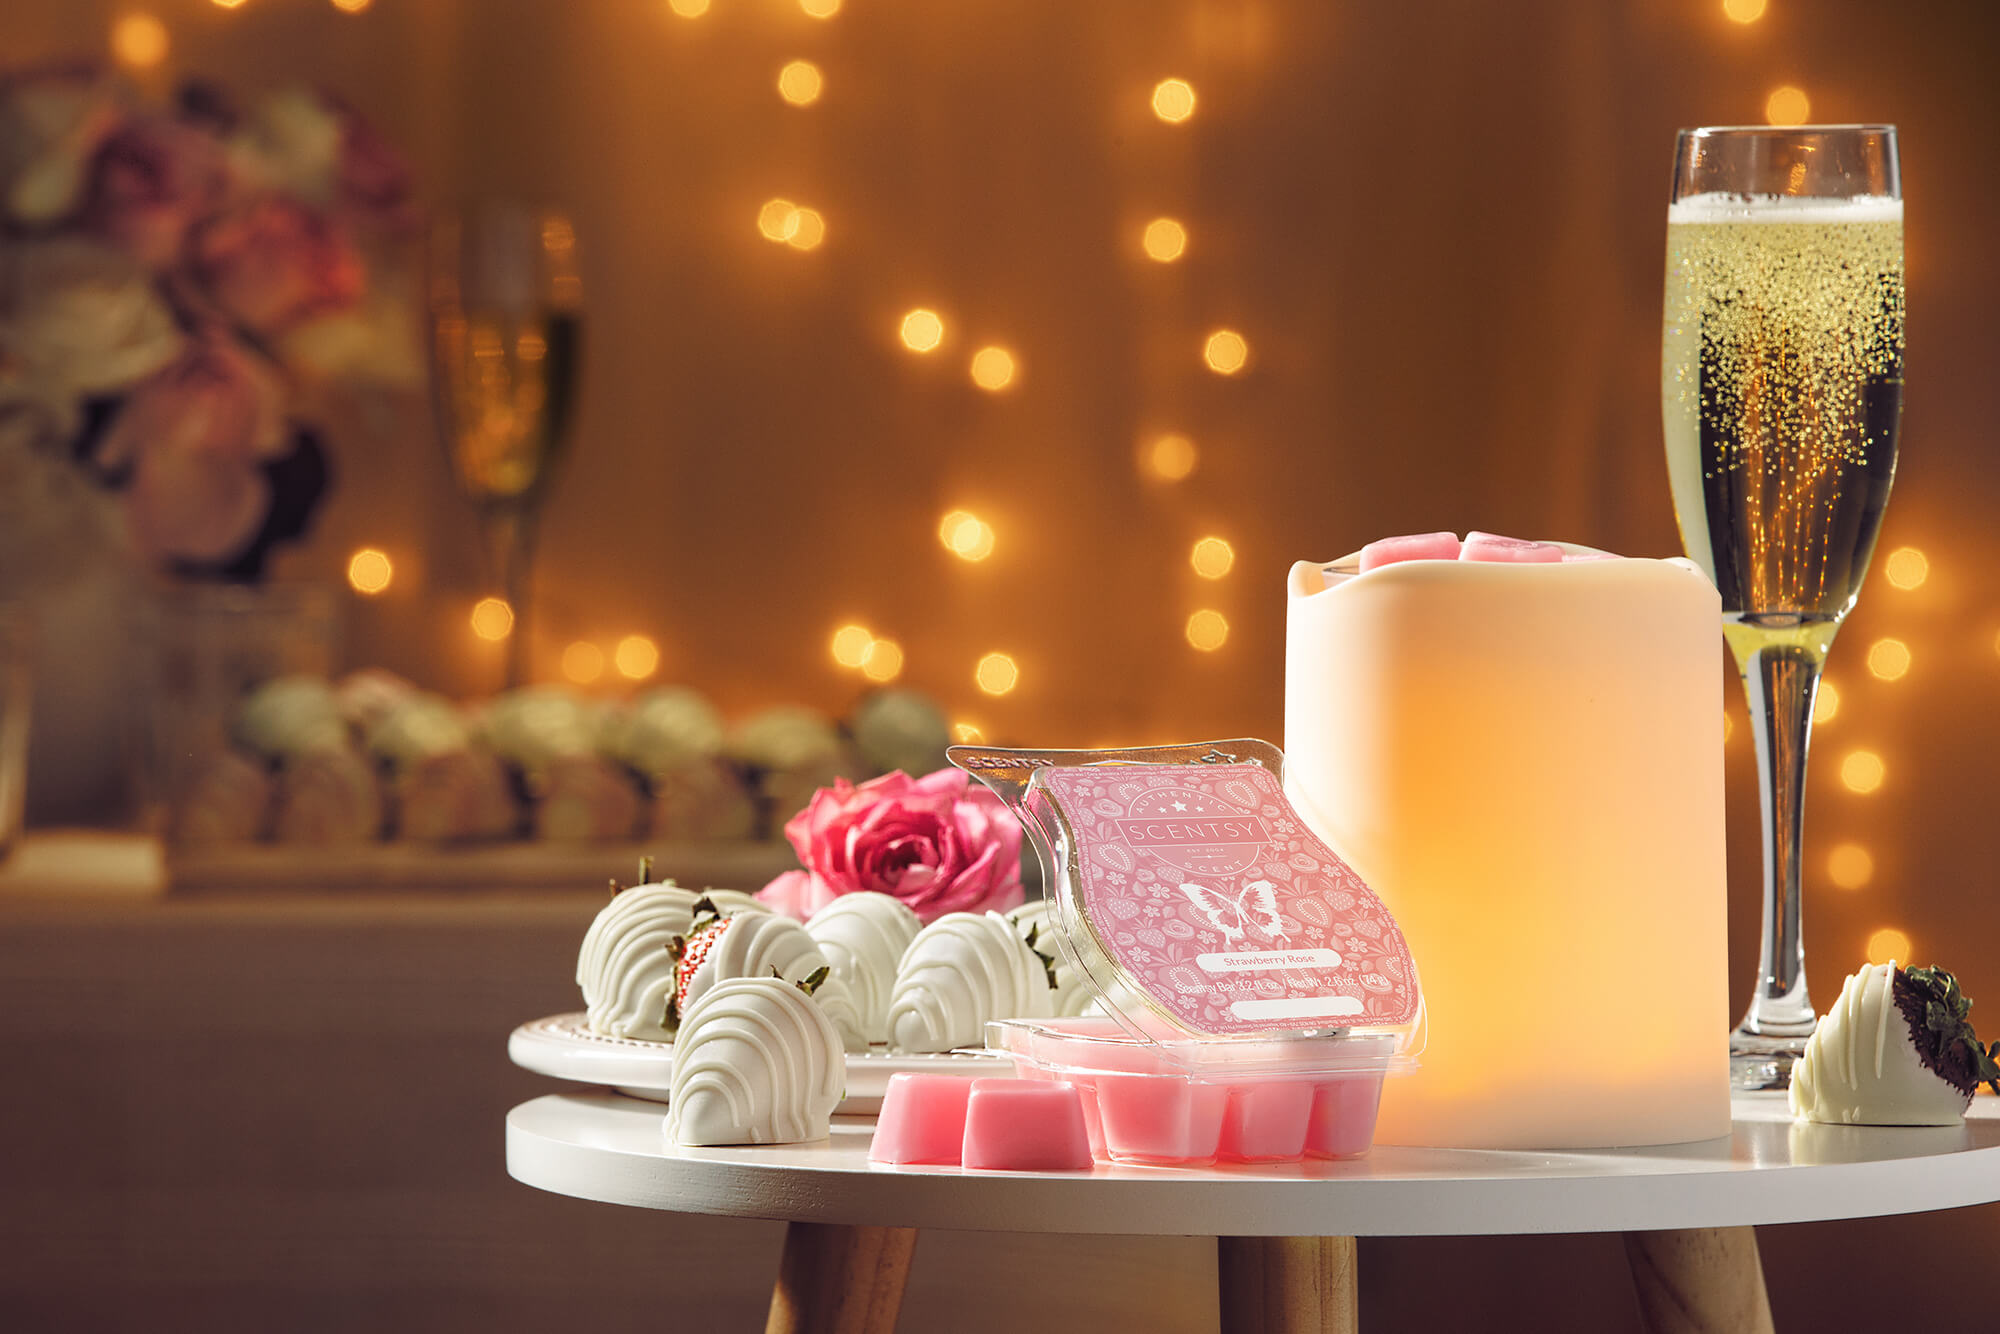 Set the mood for a romantic Valentine’s Day